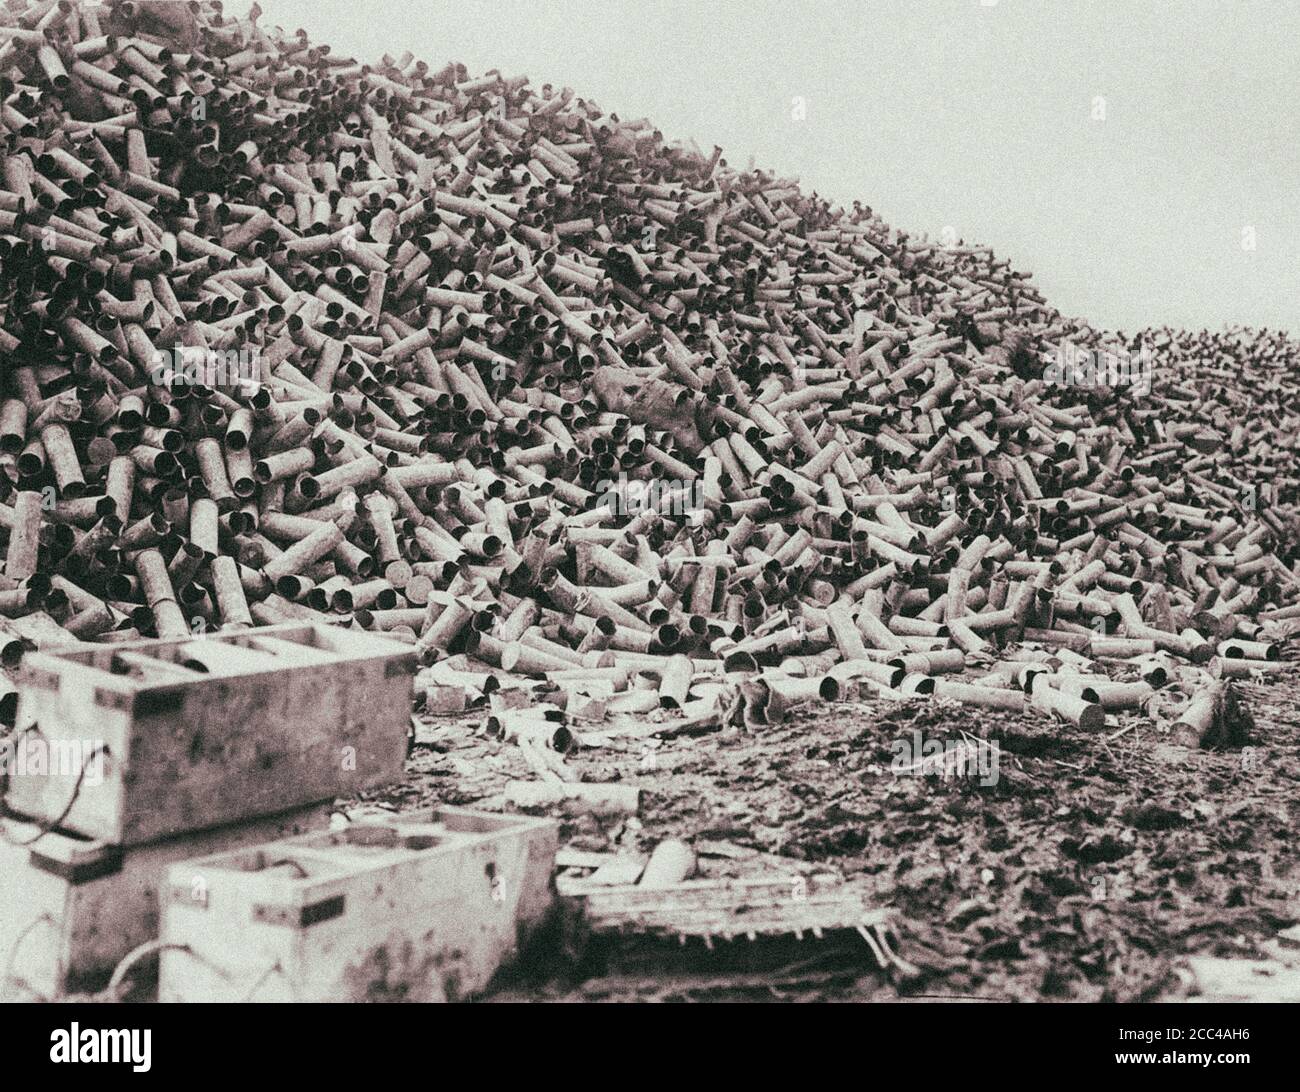 The Worl War I. Battle of the Somme. The huge pile of casings from the shells. In the week leading up to the battle, over 1.5 million shells were fire Stock Photo